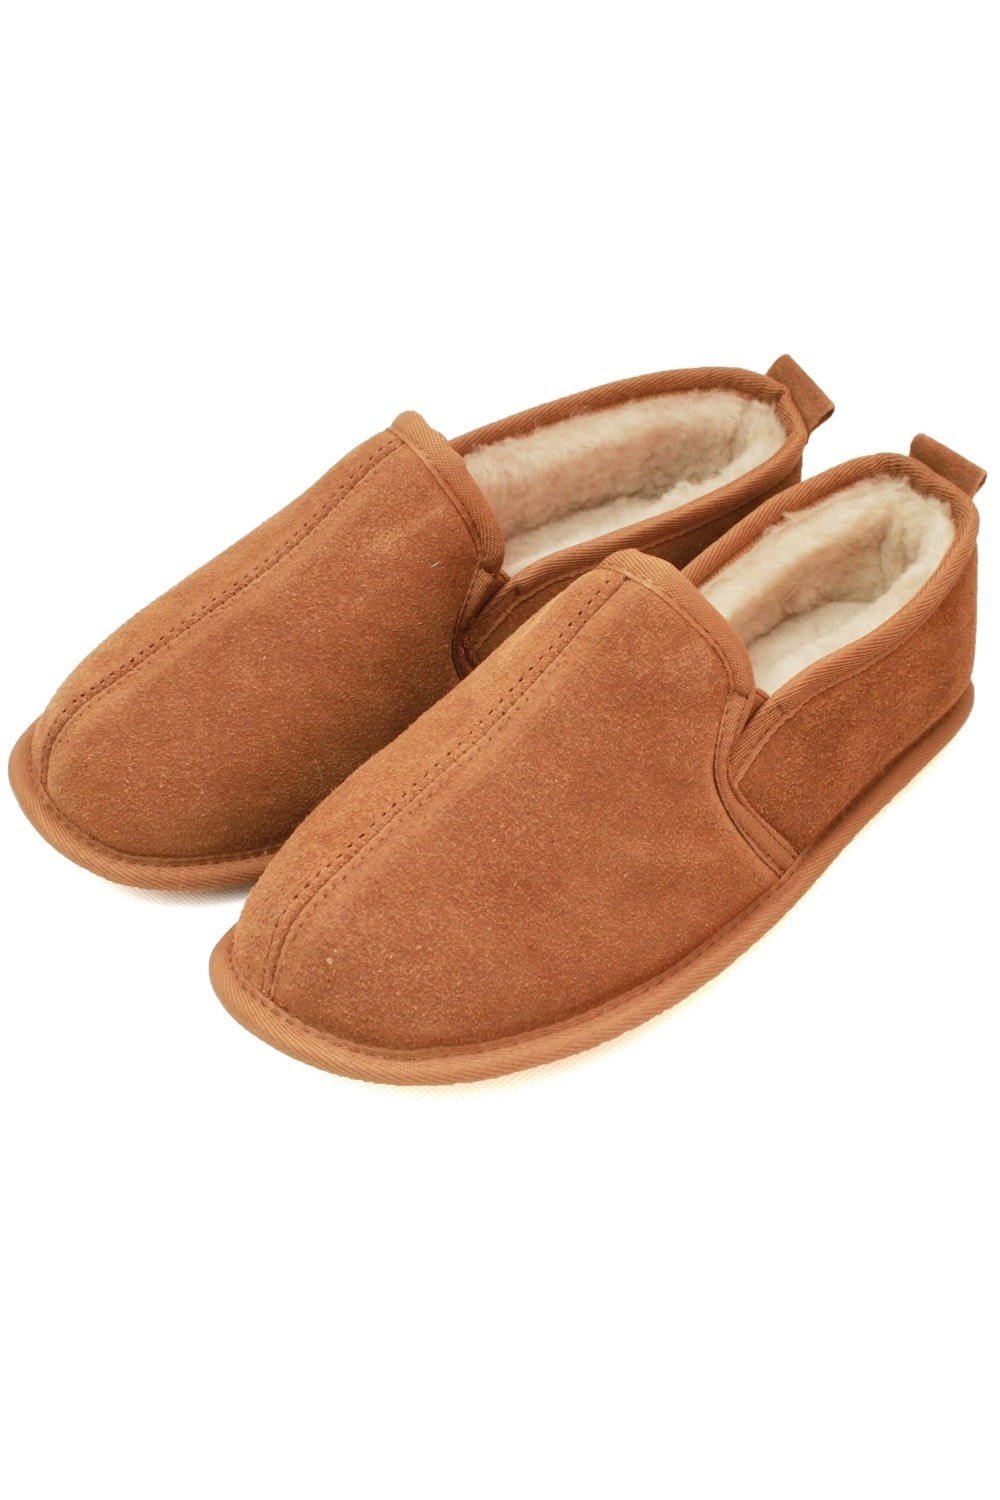 Mens Sheepskin Lined Soft Suede Sole Slippers -